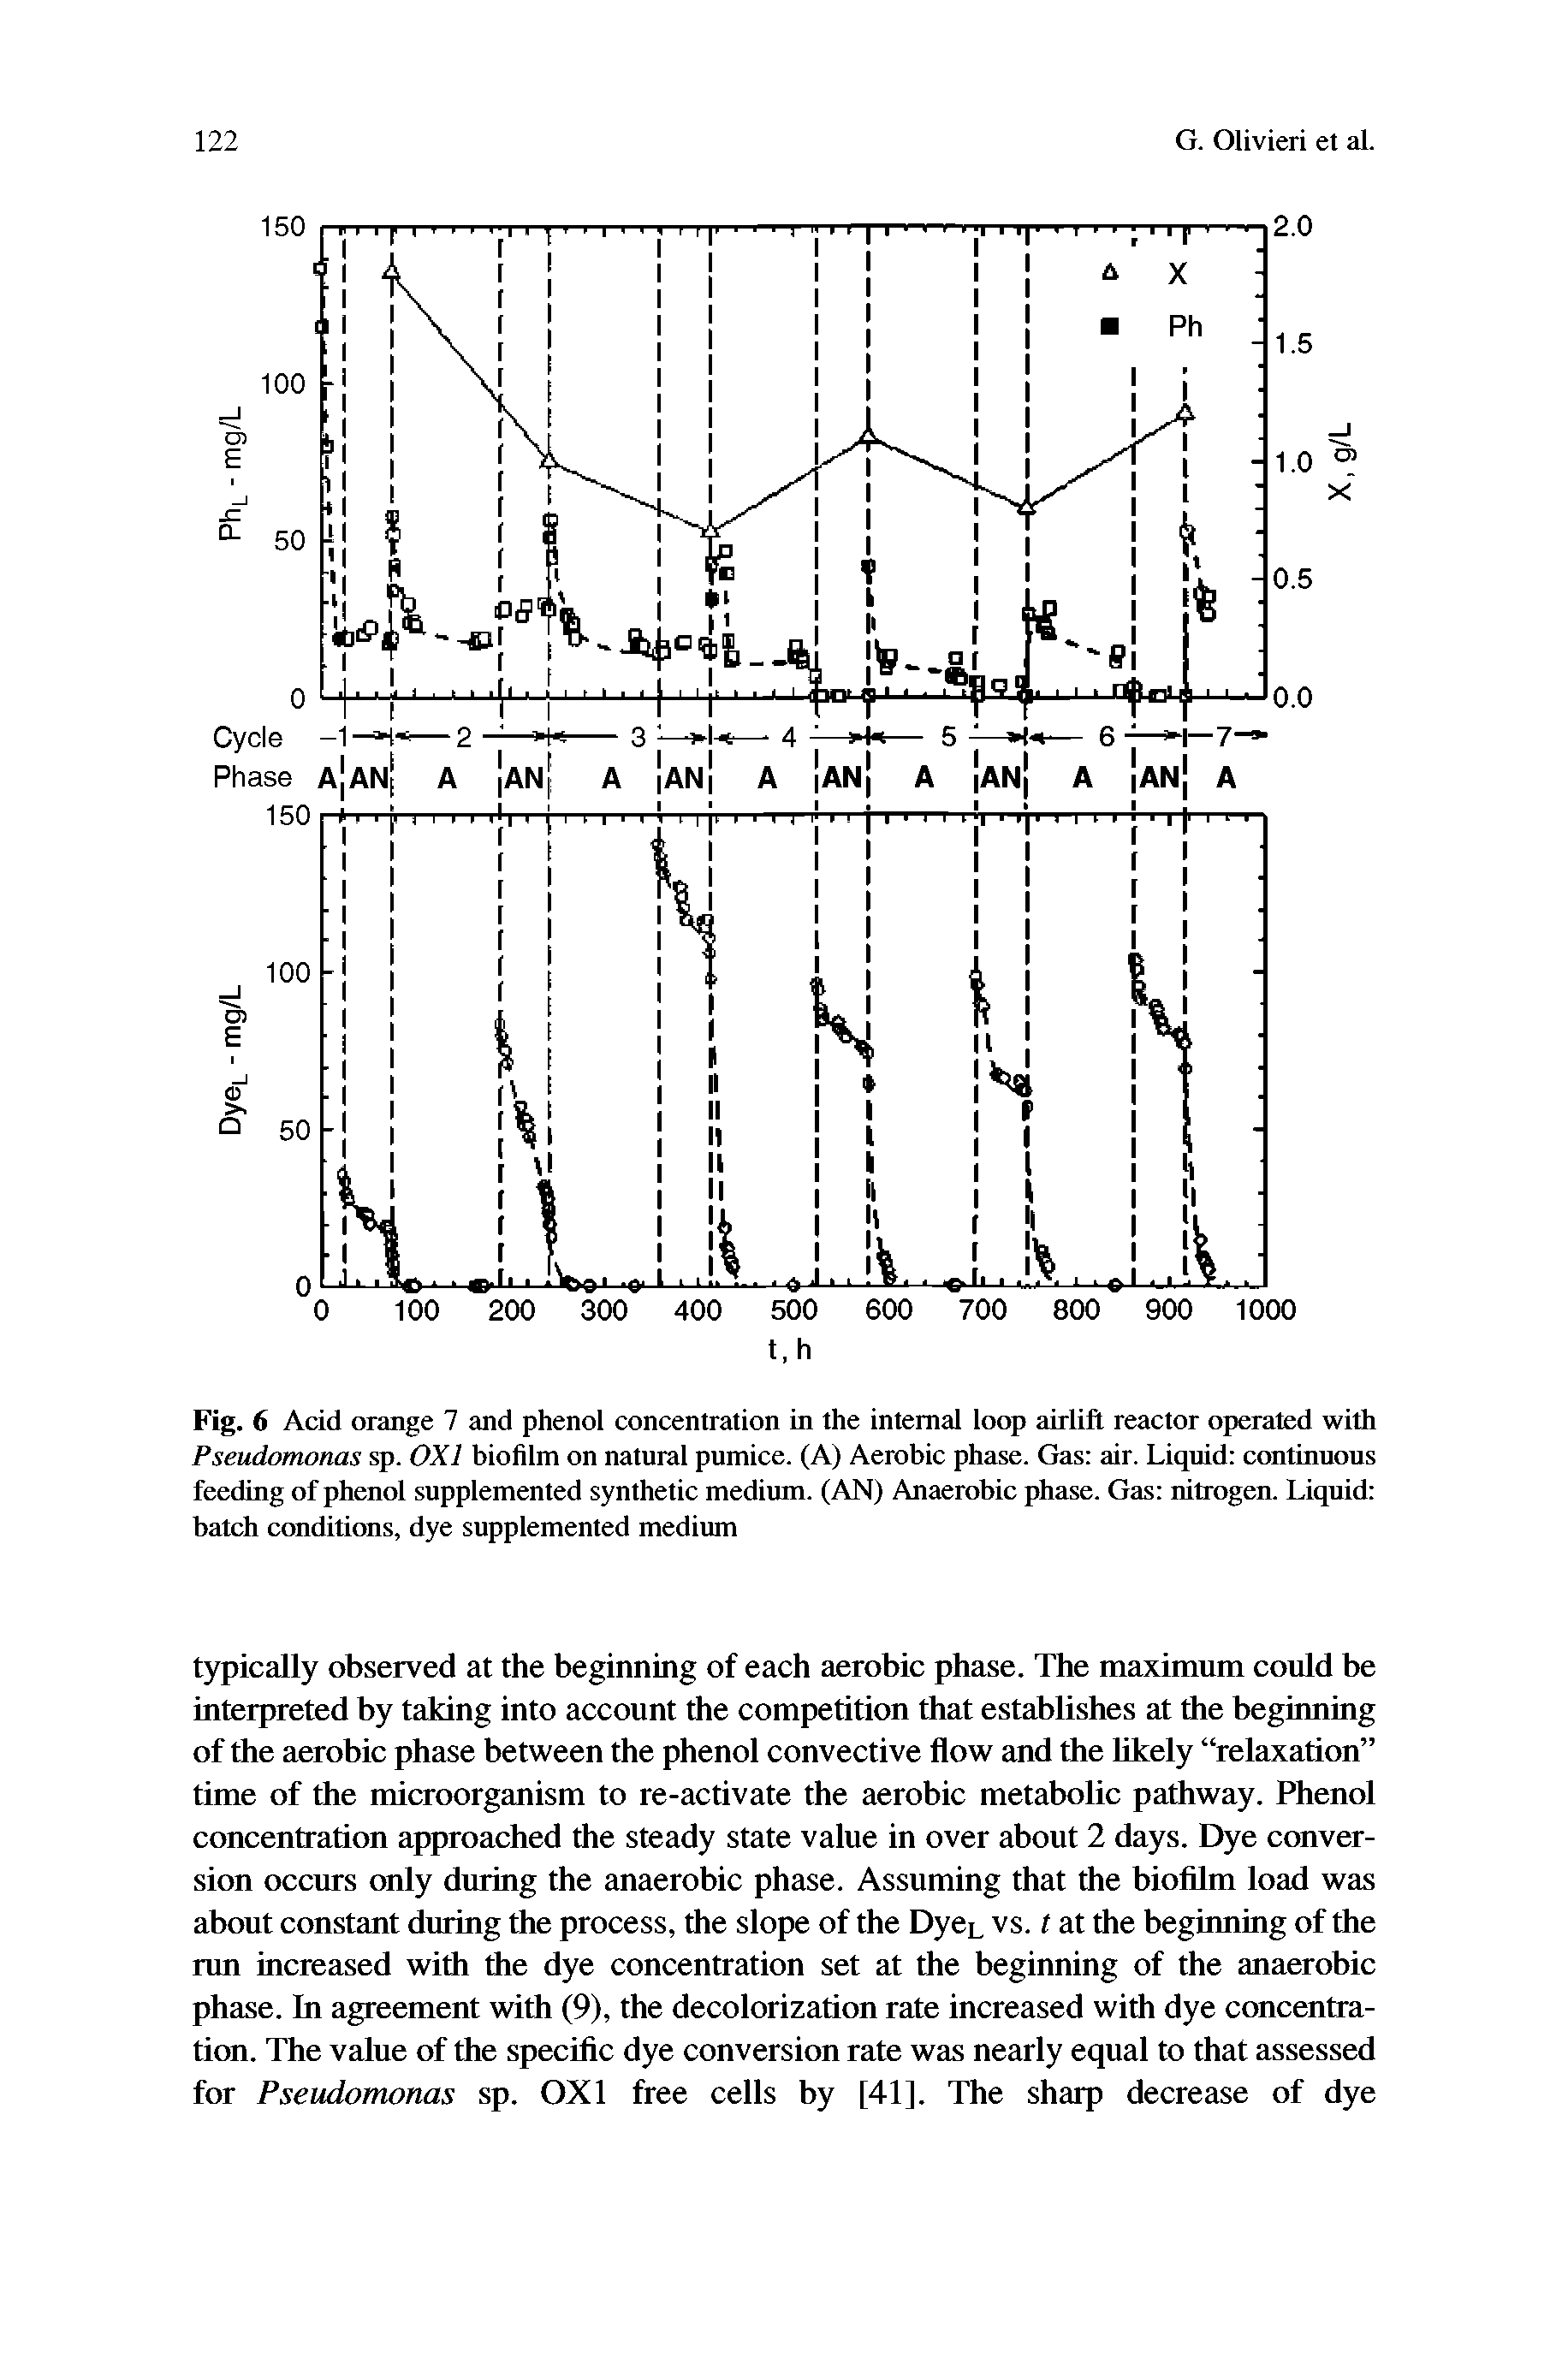 Fig. 6 Acid orange 7 and phenol concentration in the internal loop airlift reactor operated with Pseudomonas sp. 0X1 biofilm on natural pumice. (A) Aerobic phase. Gas air. Liquid continuous feeding of phenol supplemented synthetic medium. (AN) Anaerobic phase. Gas nitrogen. Liquid batch conditions, dye supplemented medium...